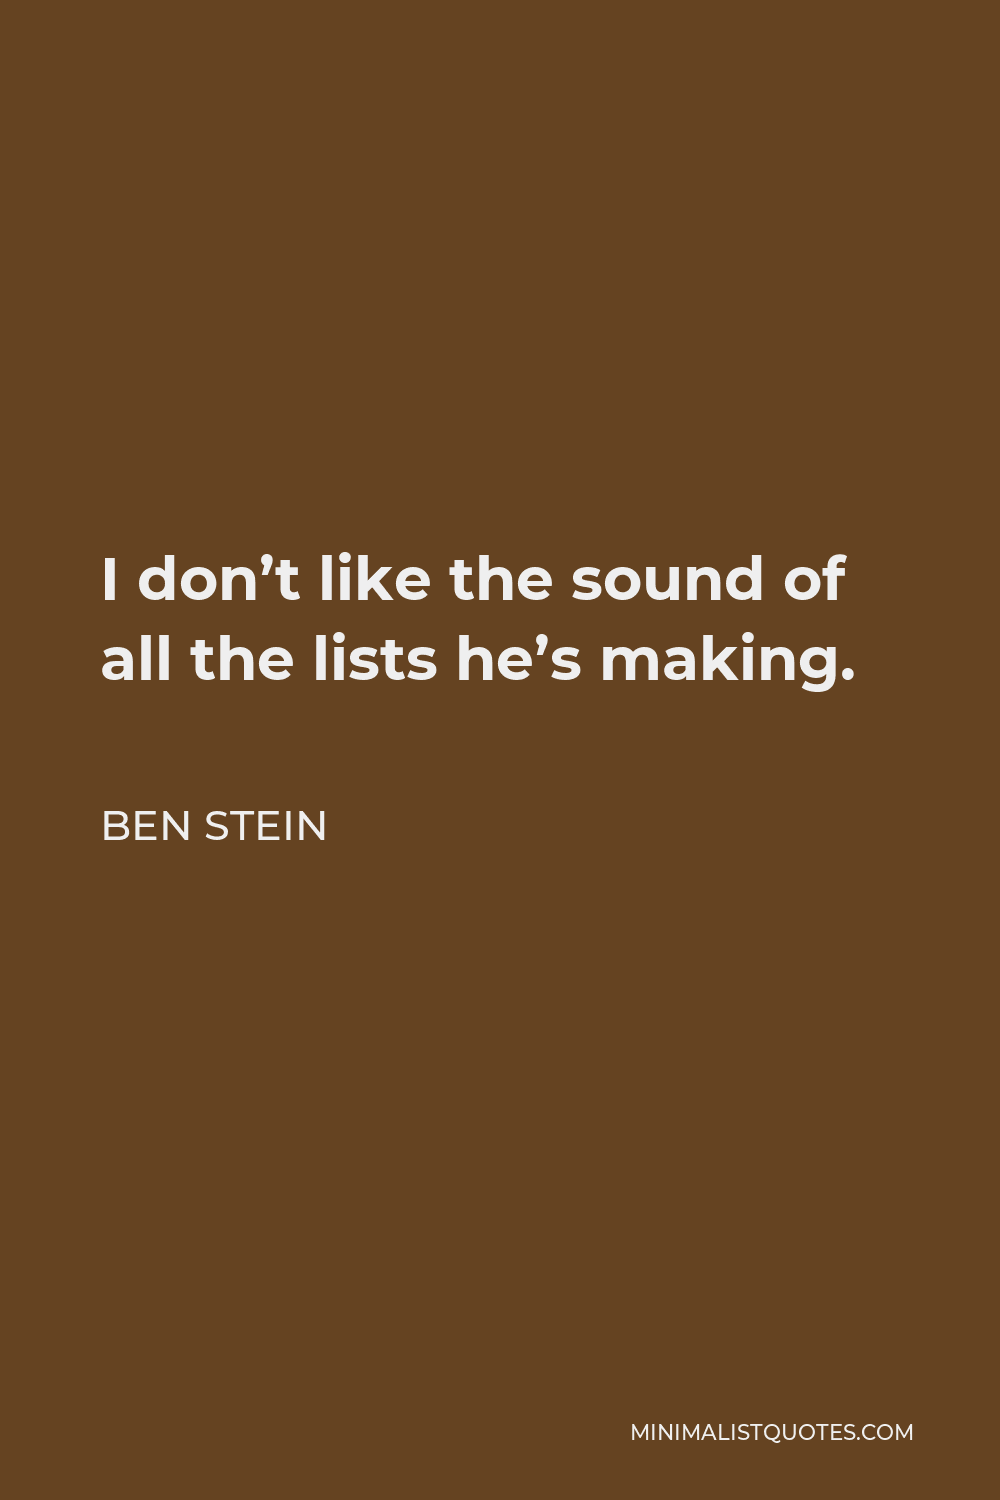 Ben Stein Quote - I don’t like the sound of all the lists he’s making.